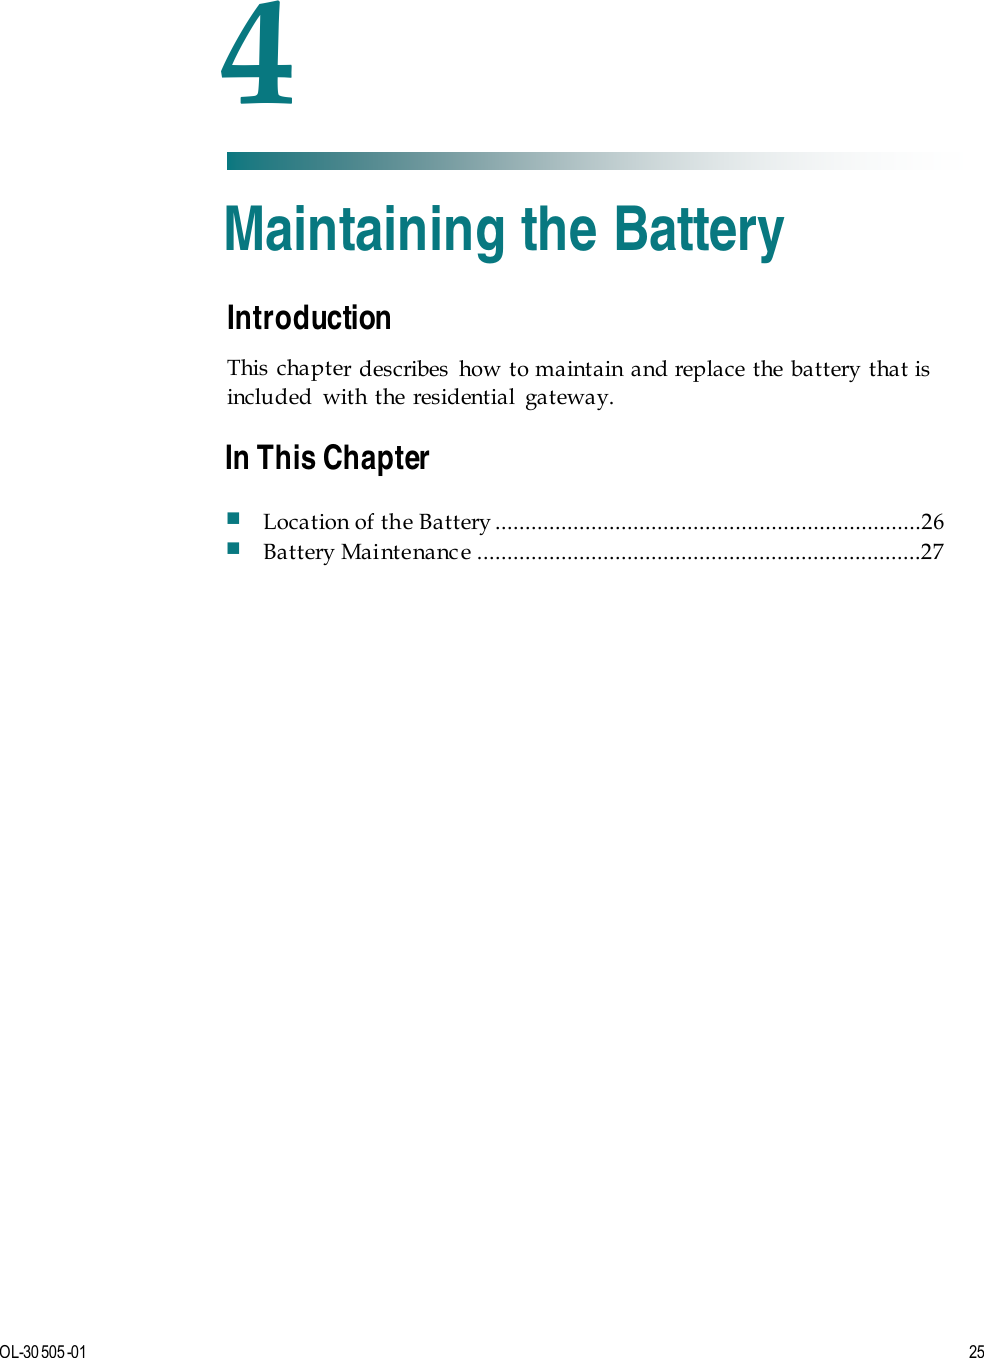   OL-30 505-01  25  Introduction This chapter describes how to maintain and replace the battery that is included with the residential gateway.     4 Chapter 4 Maintaining the Battery In This Chapter  Location of the Battery .......................................................................26  Battery Maintenanc e ..........................................................................27 